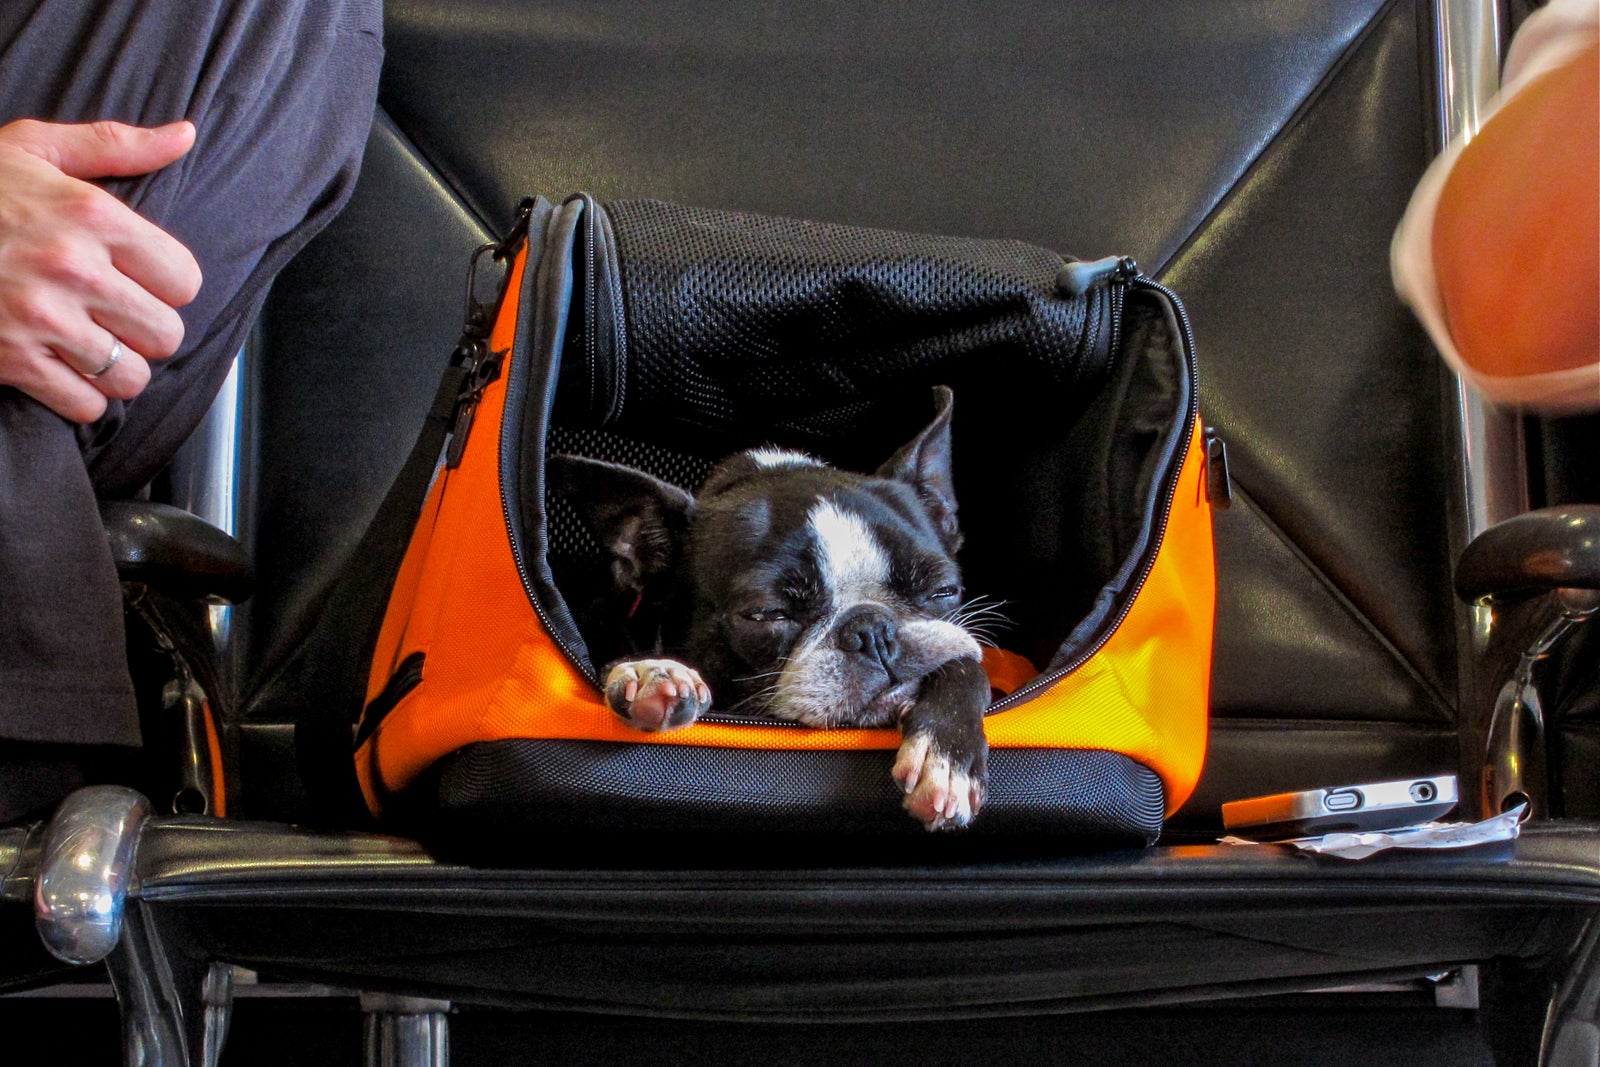 southwest airlines dog travel policy